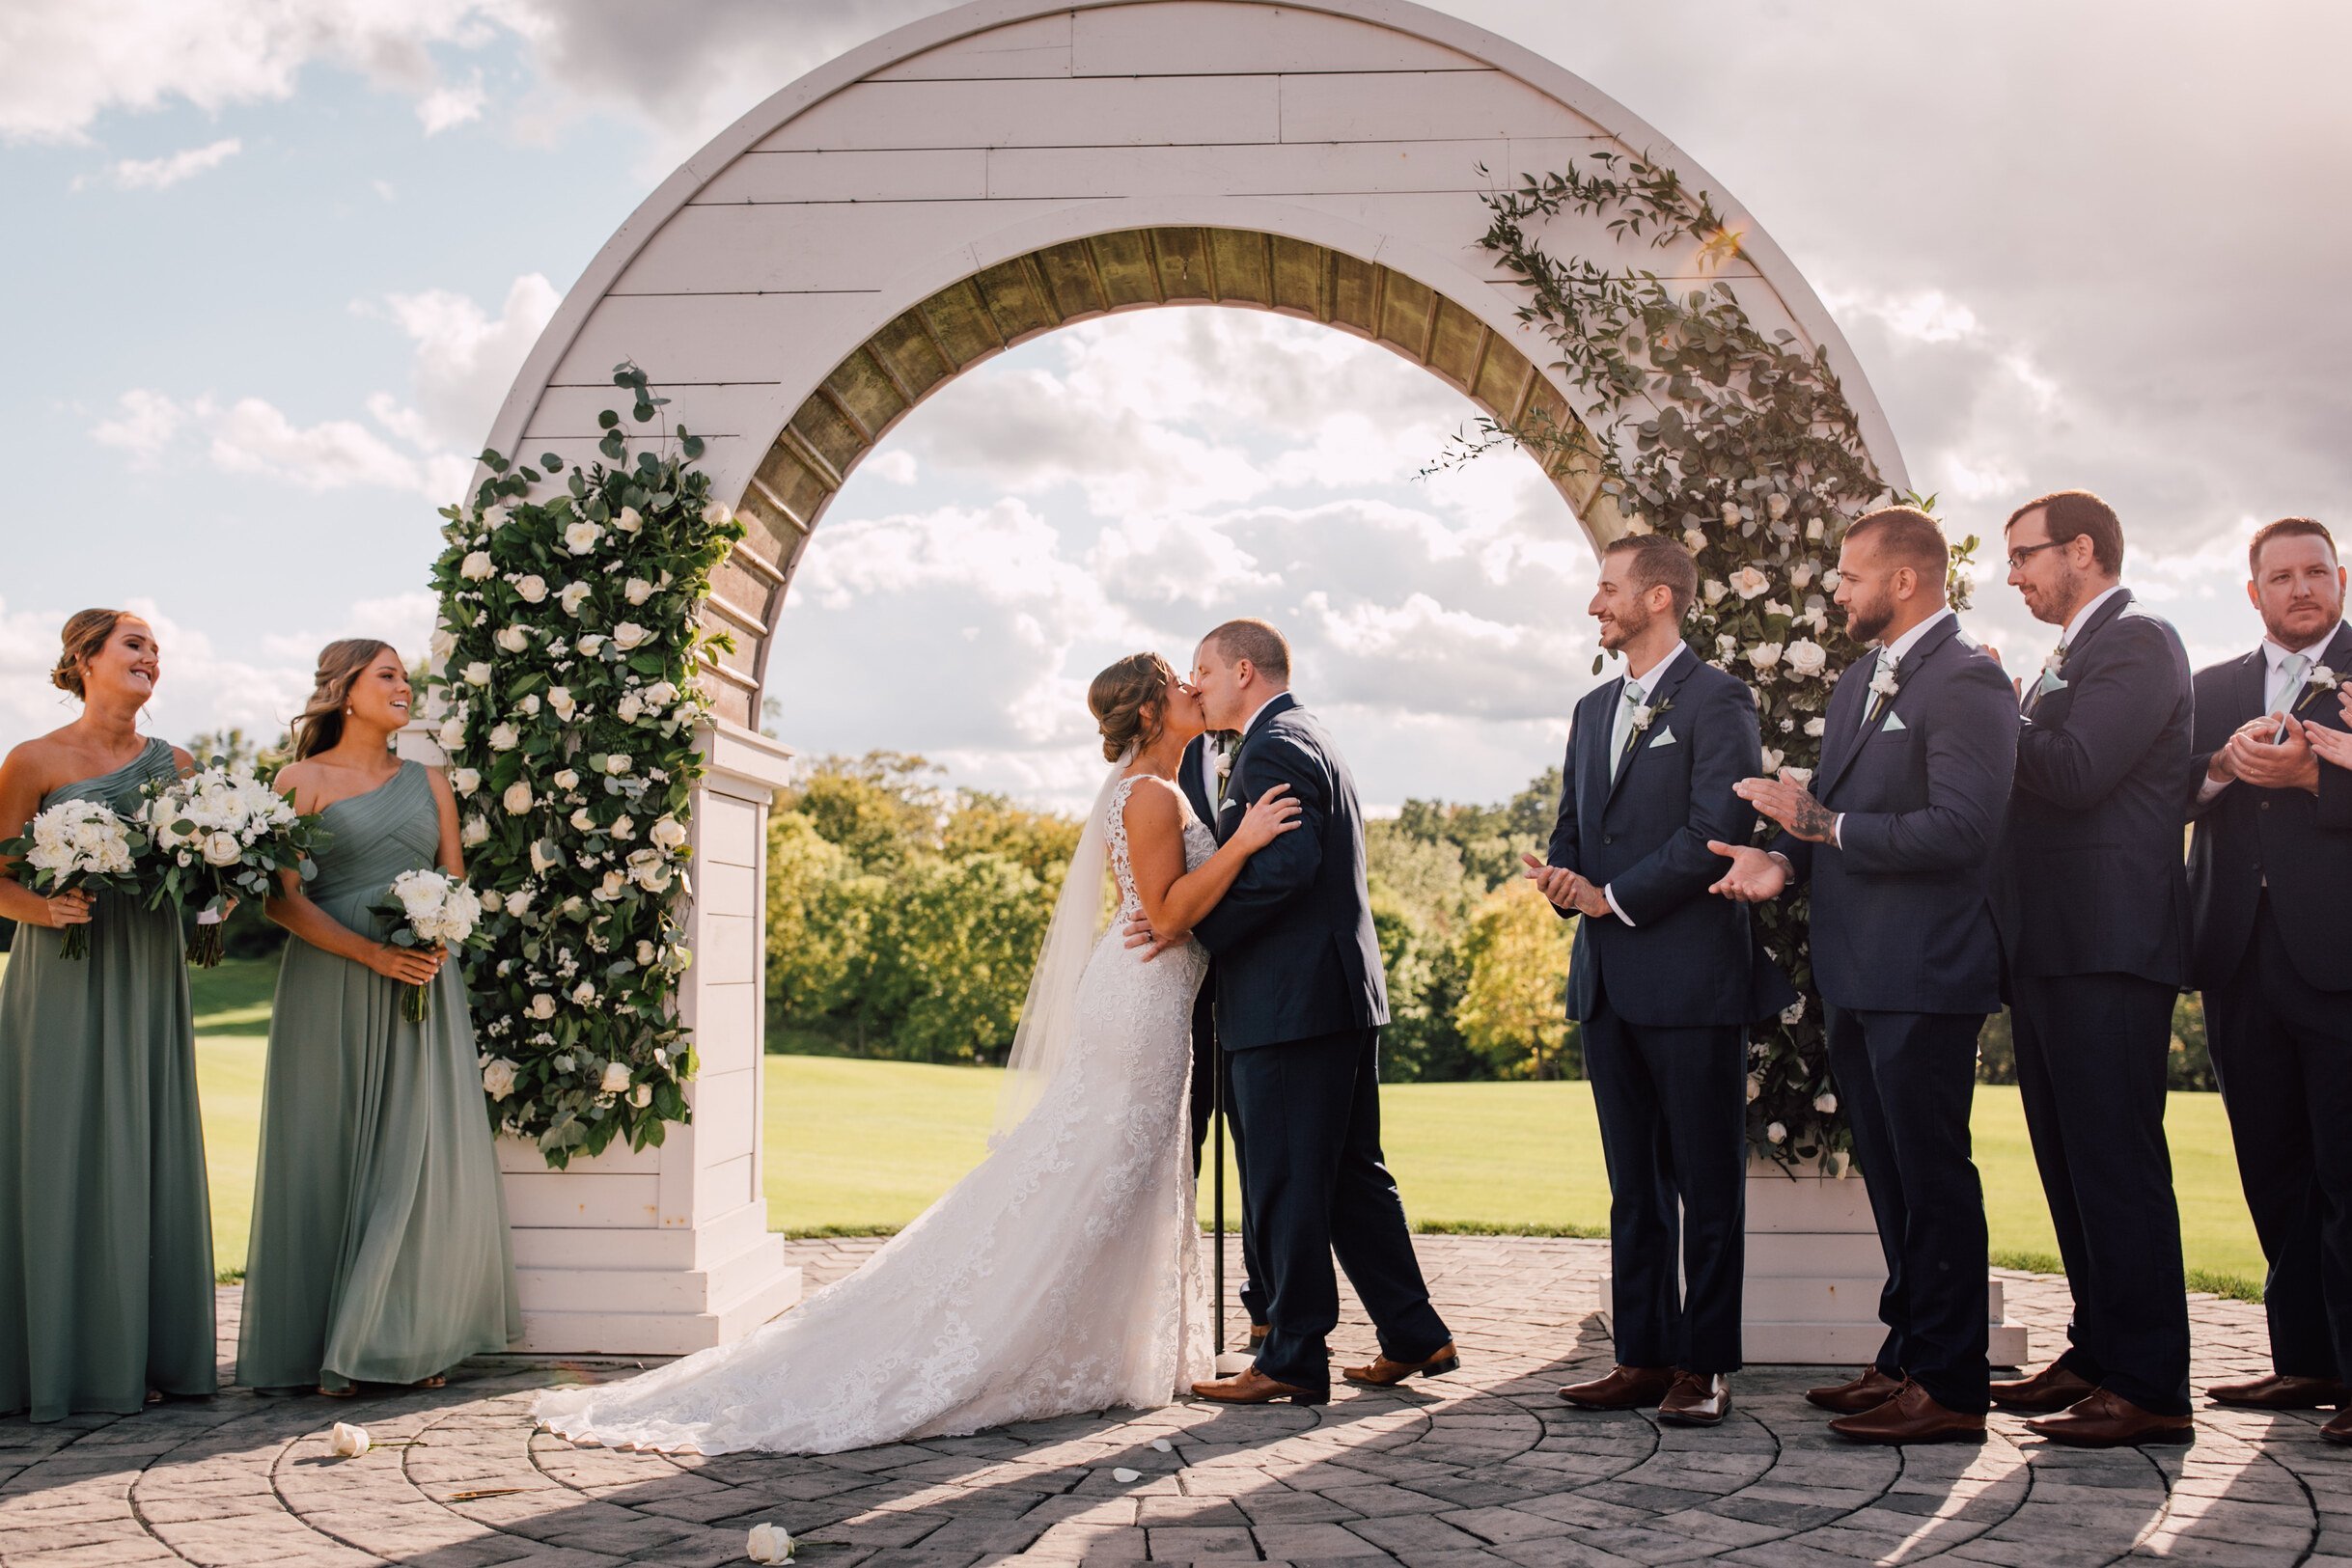  The bride and groom share a kiss under a wooden wedding arch 